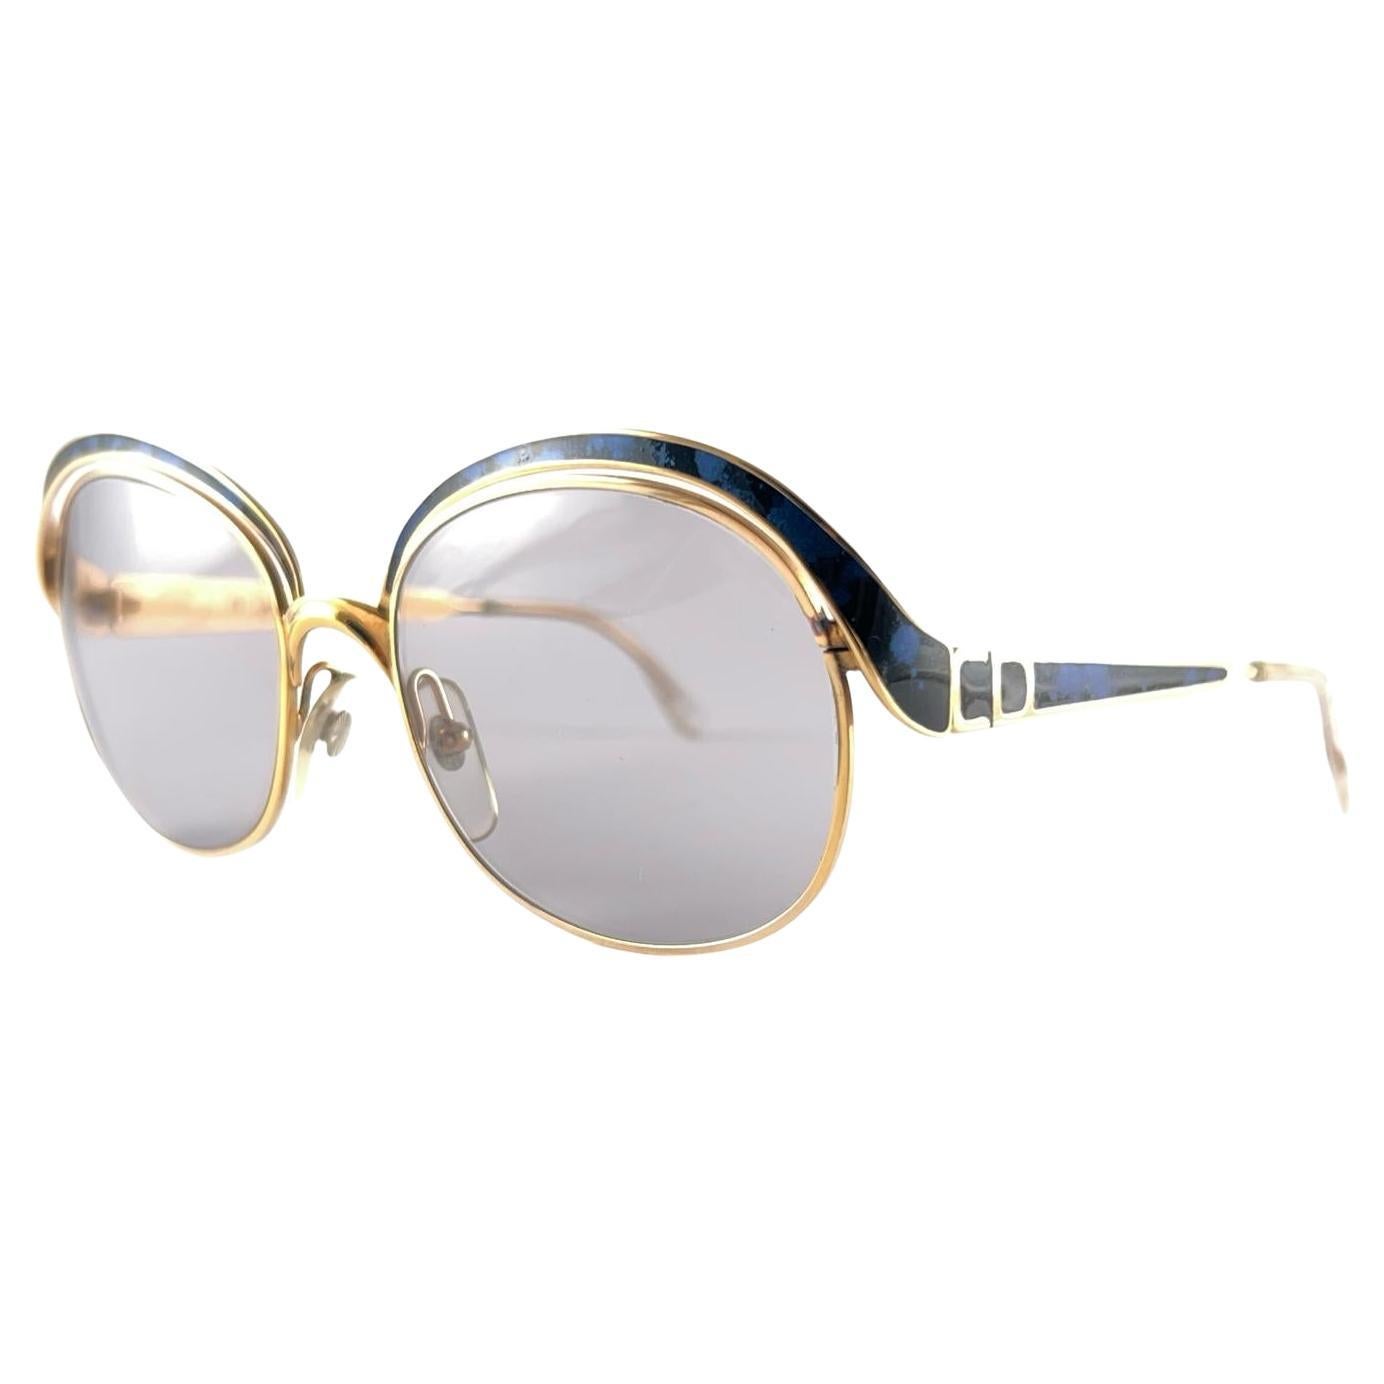 How do I know if Dior sunglasses are real?